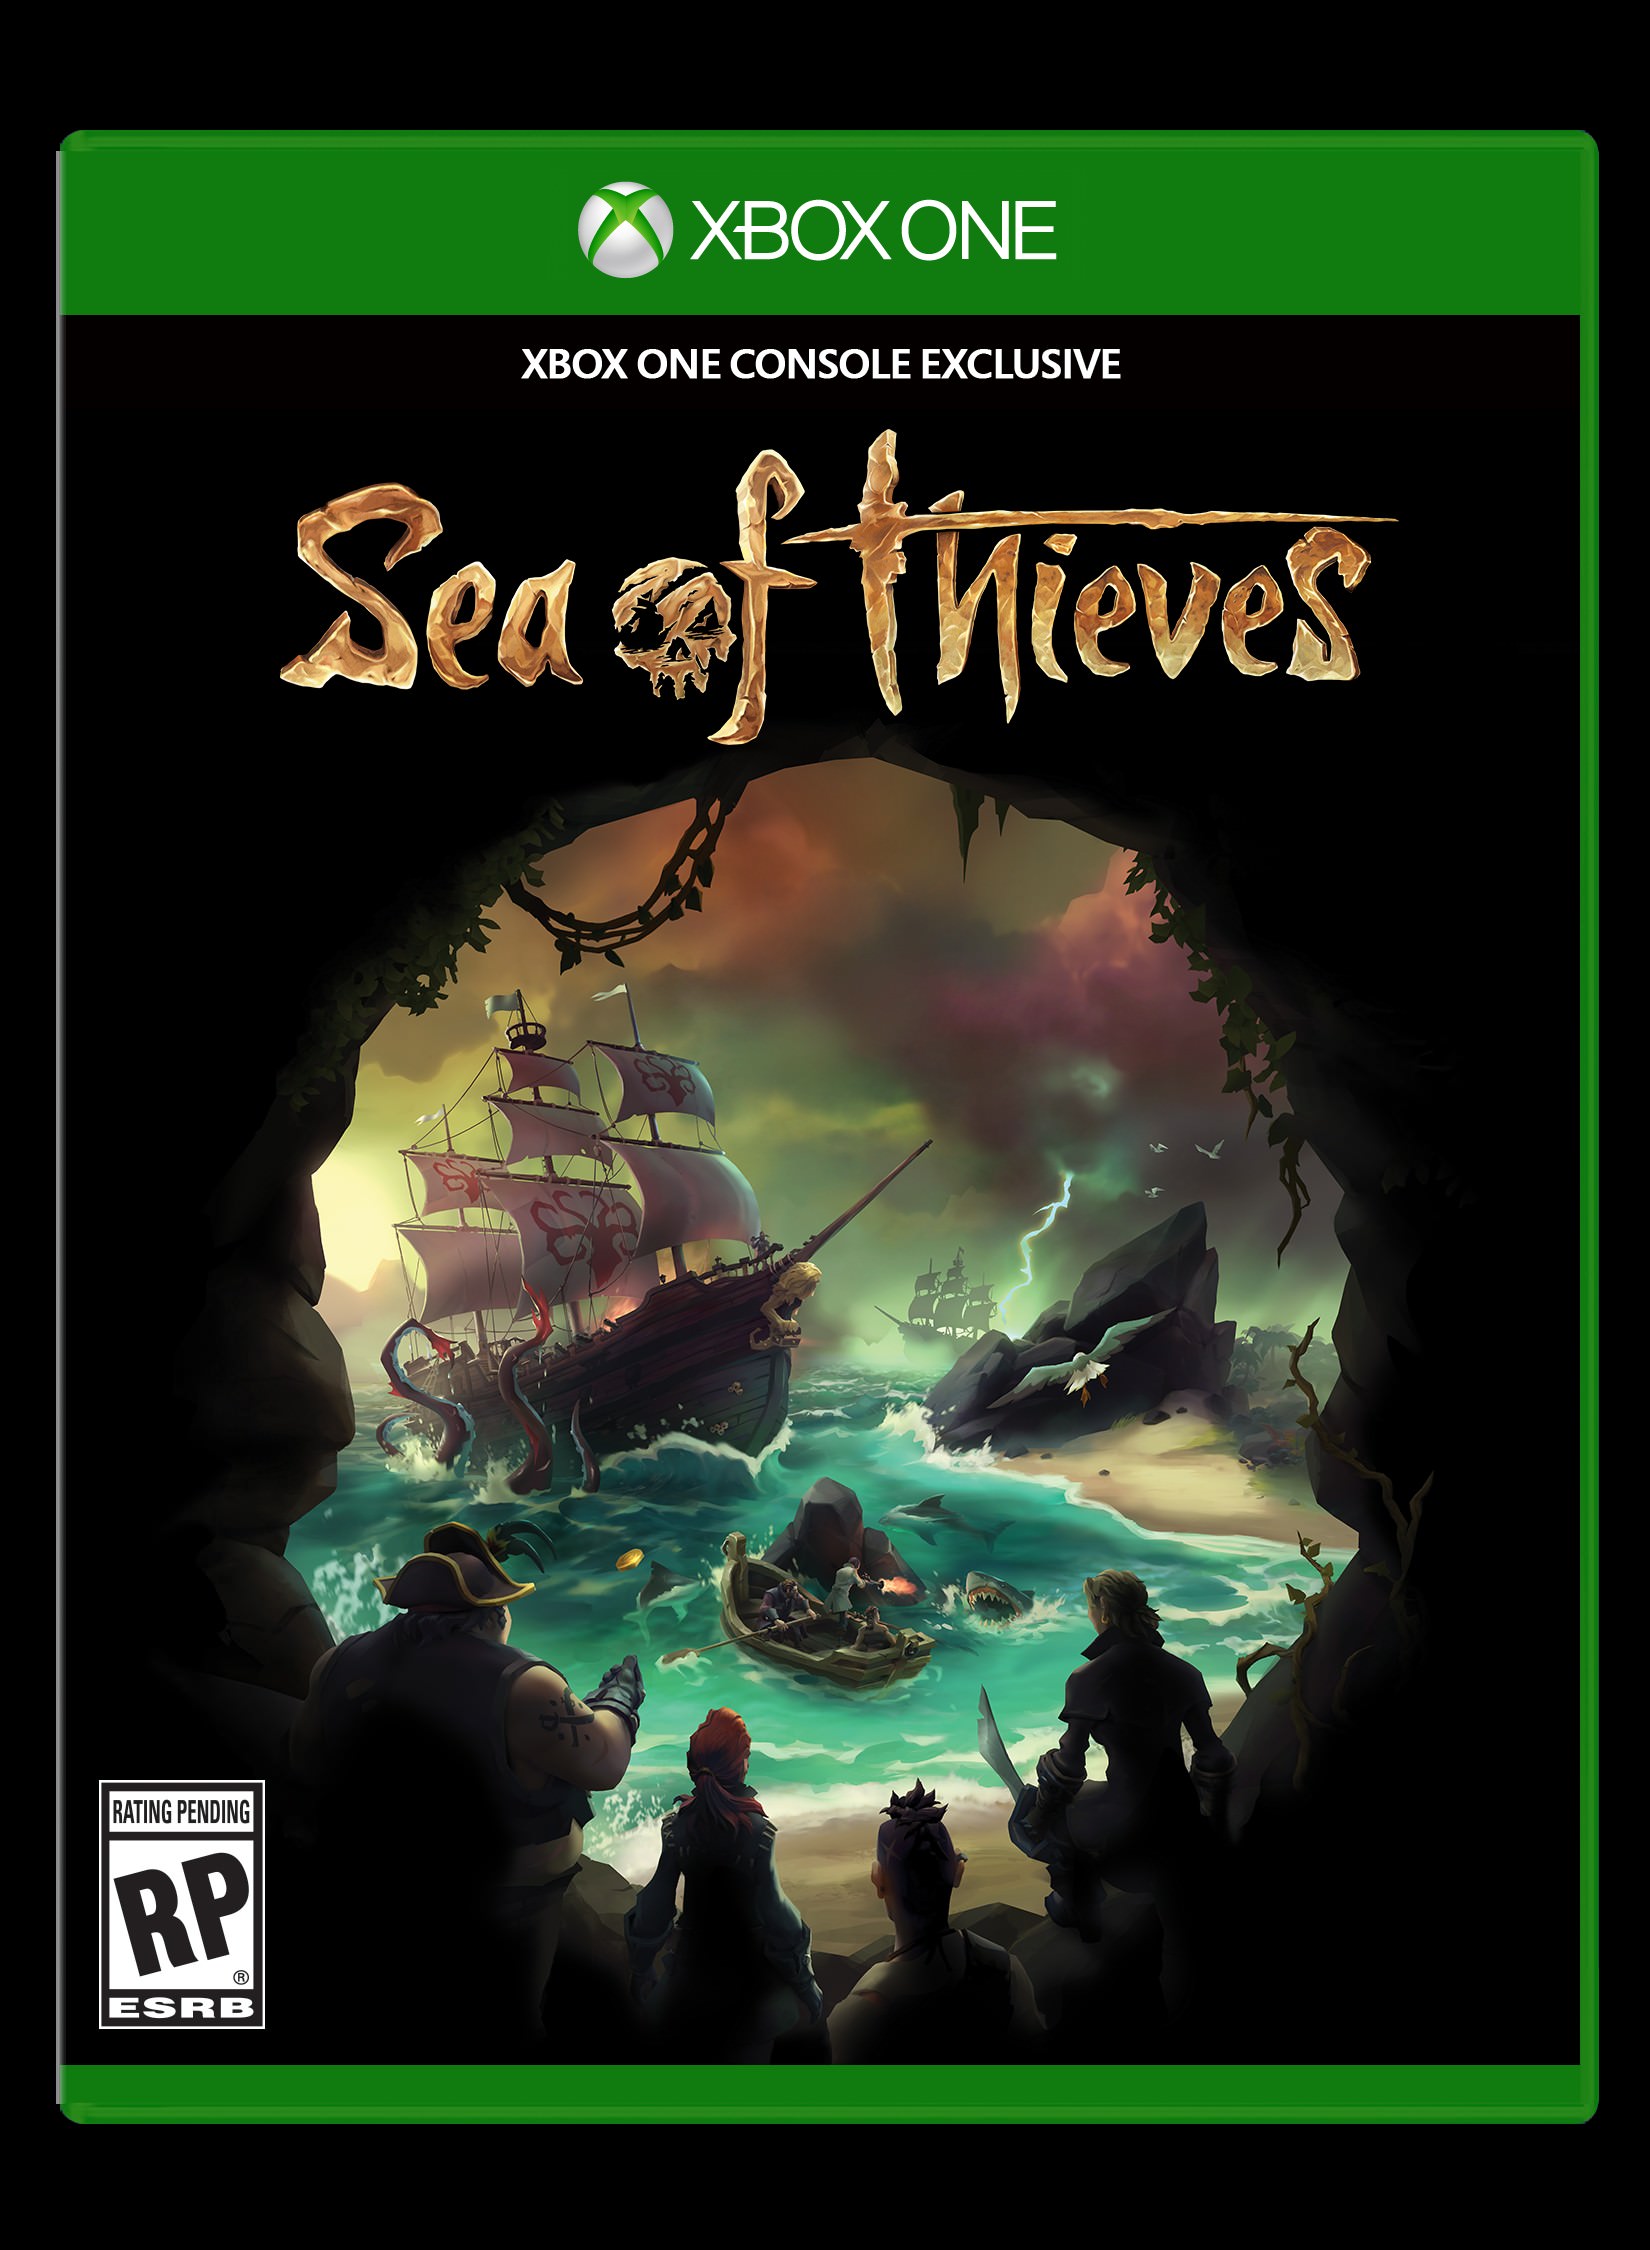 Sea of Thieves - Cover Art (1)